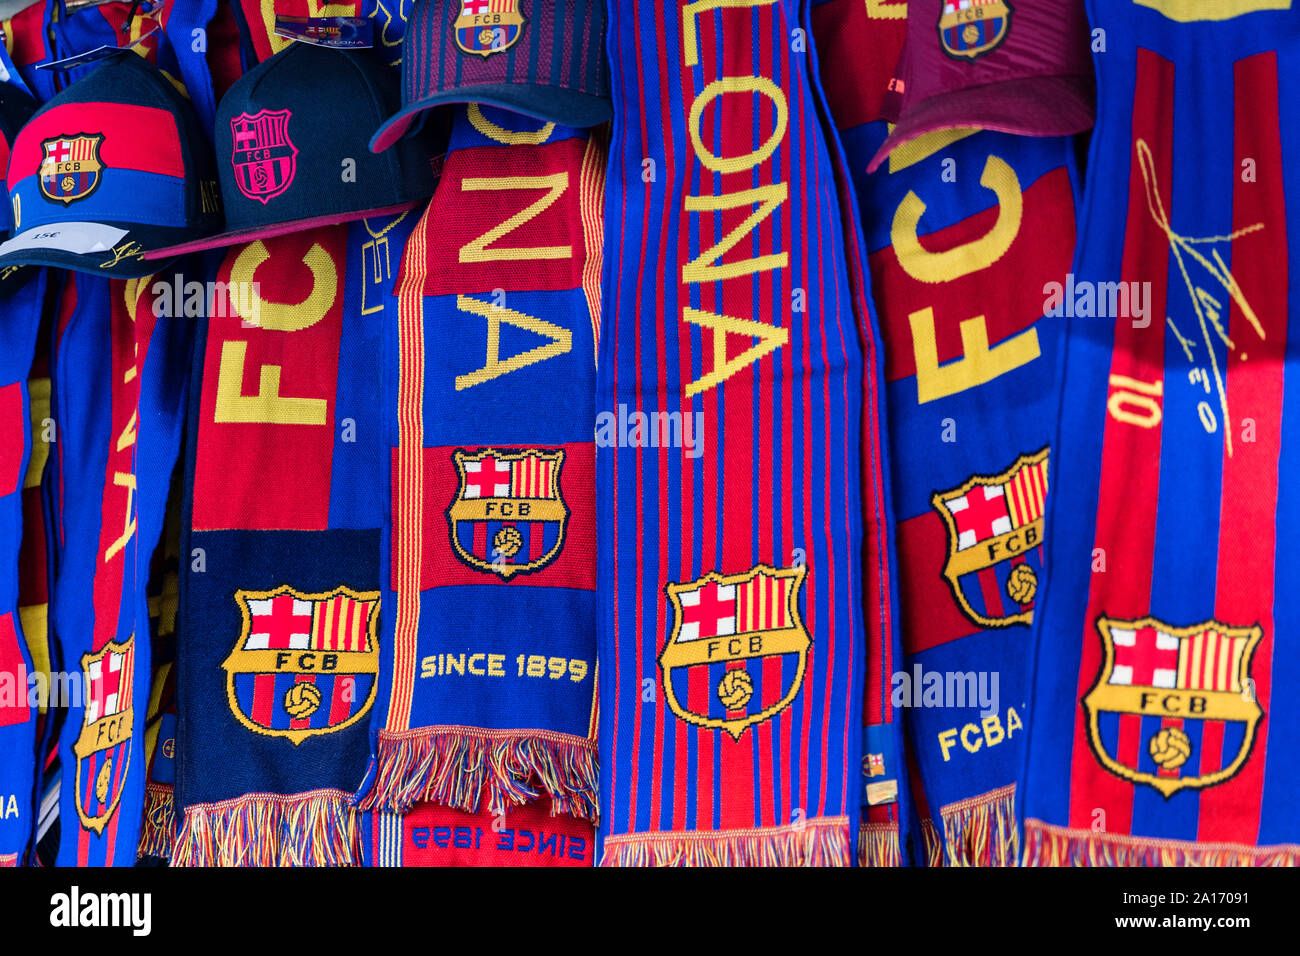 Fc barcelona mobile app hi-res stock photography and images - Alamy